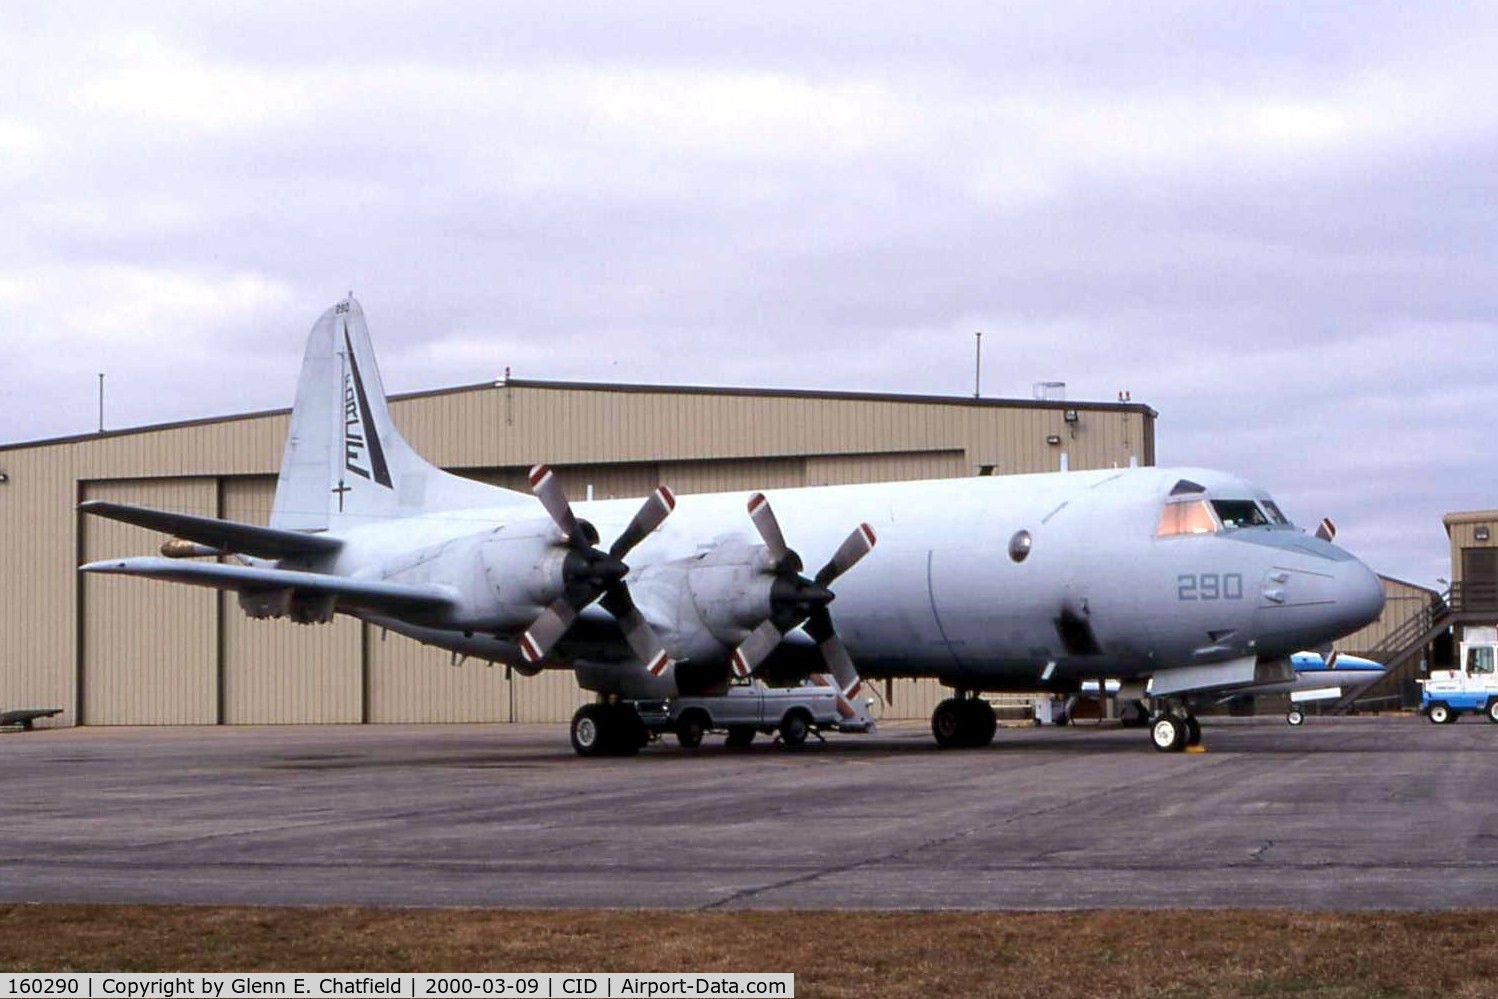 160290, Lockheed P-3C Orion C/N 285A-5653, P-3C on the Rockwell-Collins ramp